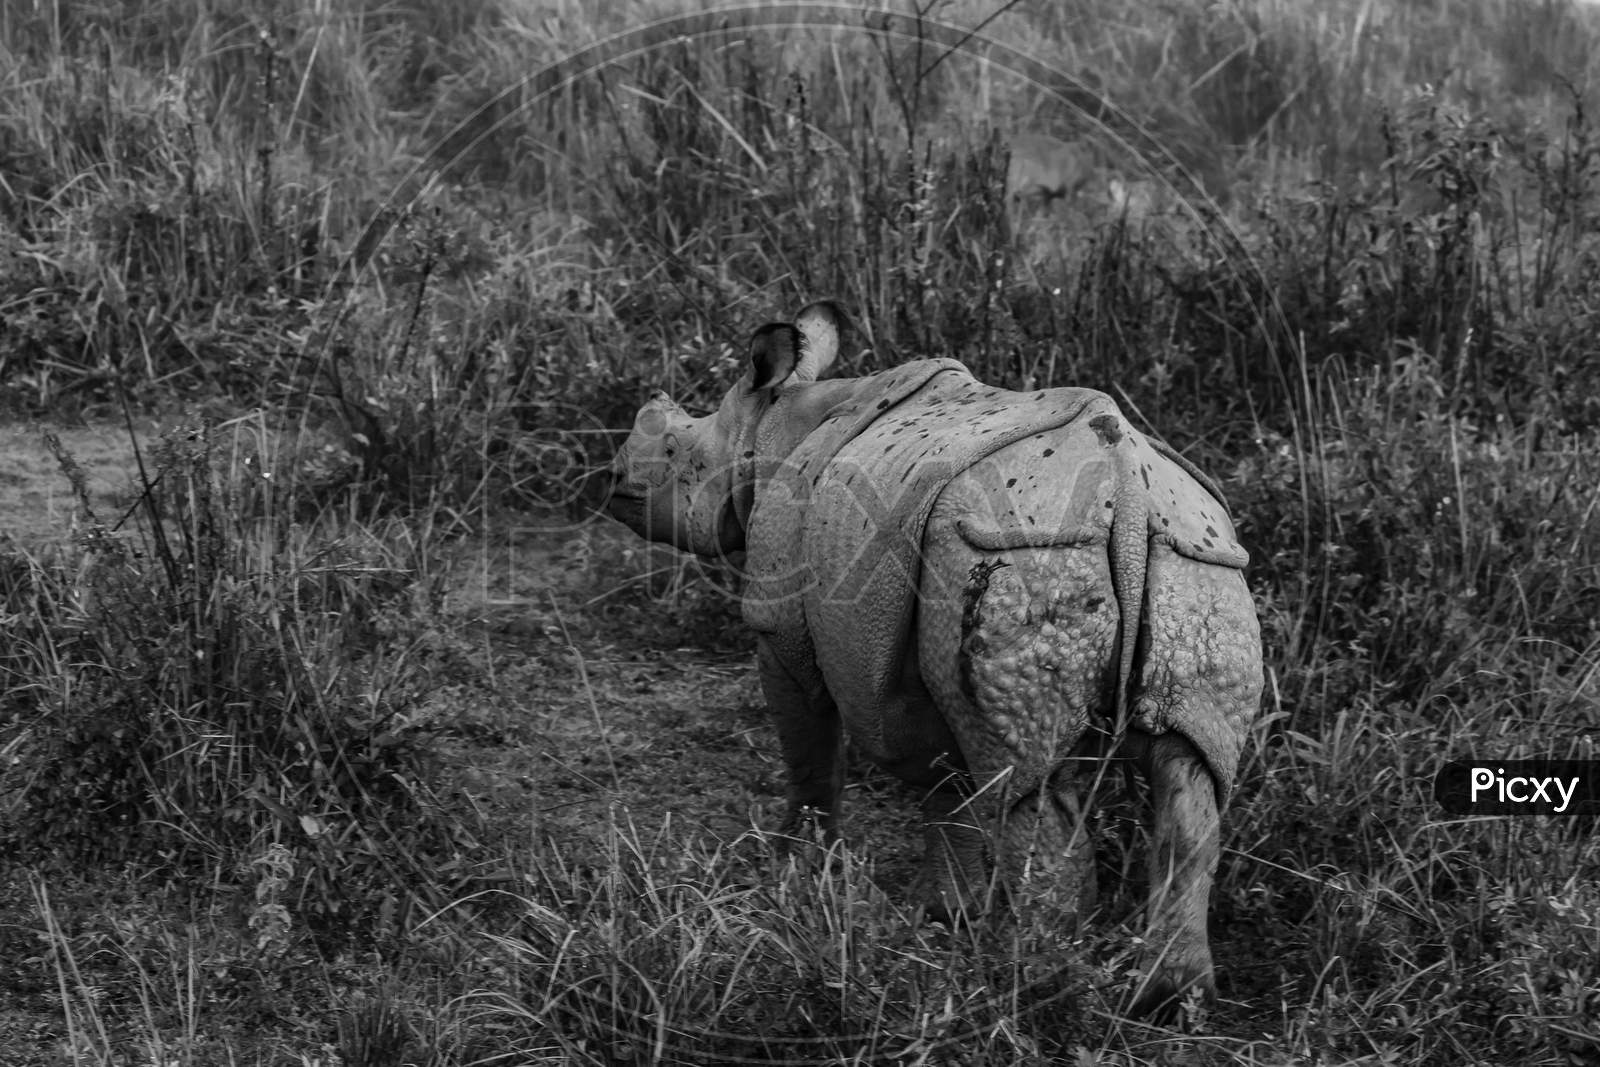 A monochrome image of a one horned rhino standing  with its back